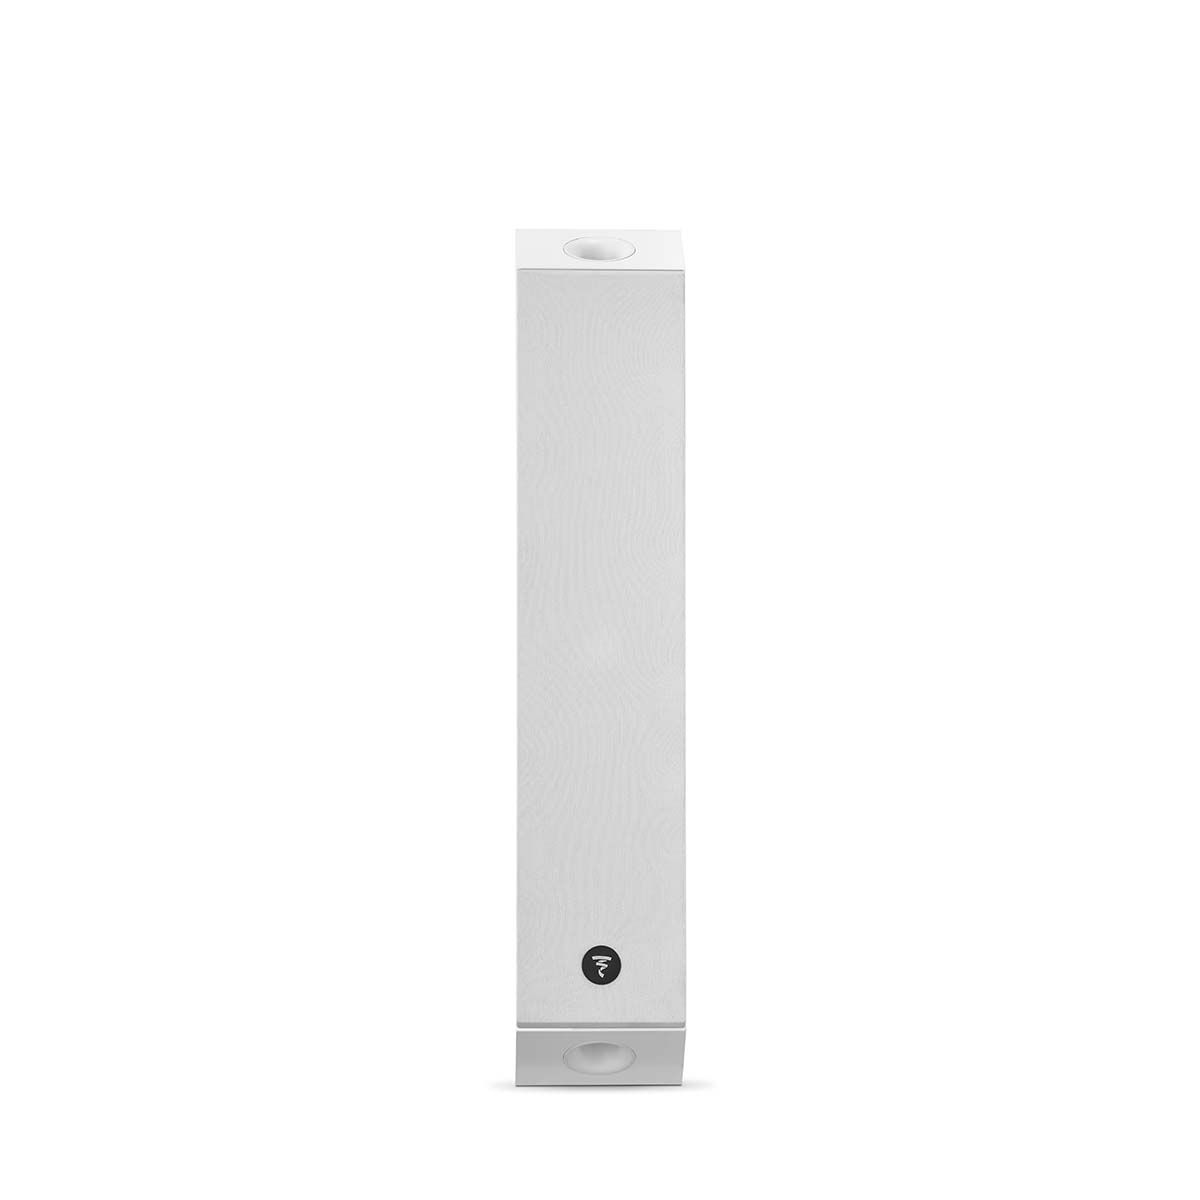 Focal On Wall 301 Speaker, Gloss White, vertical front view with grille